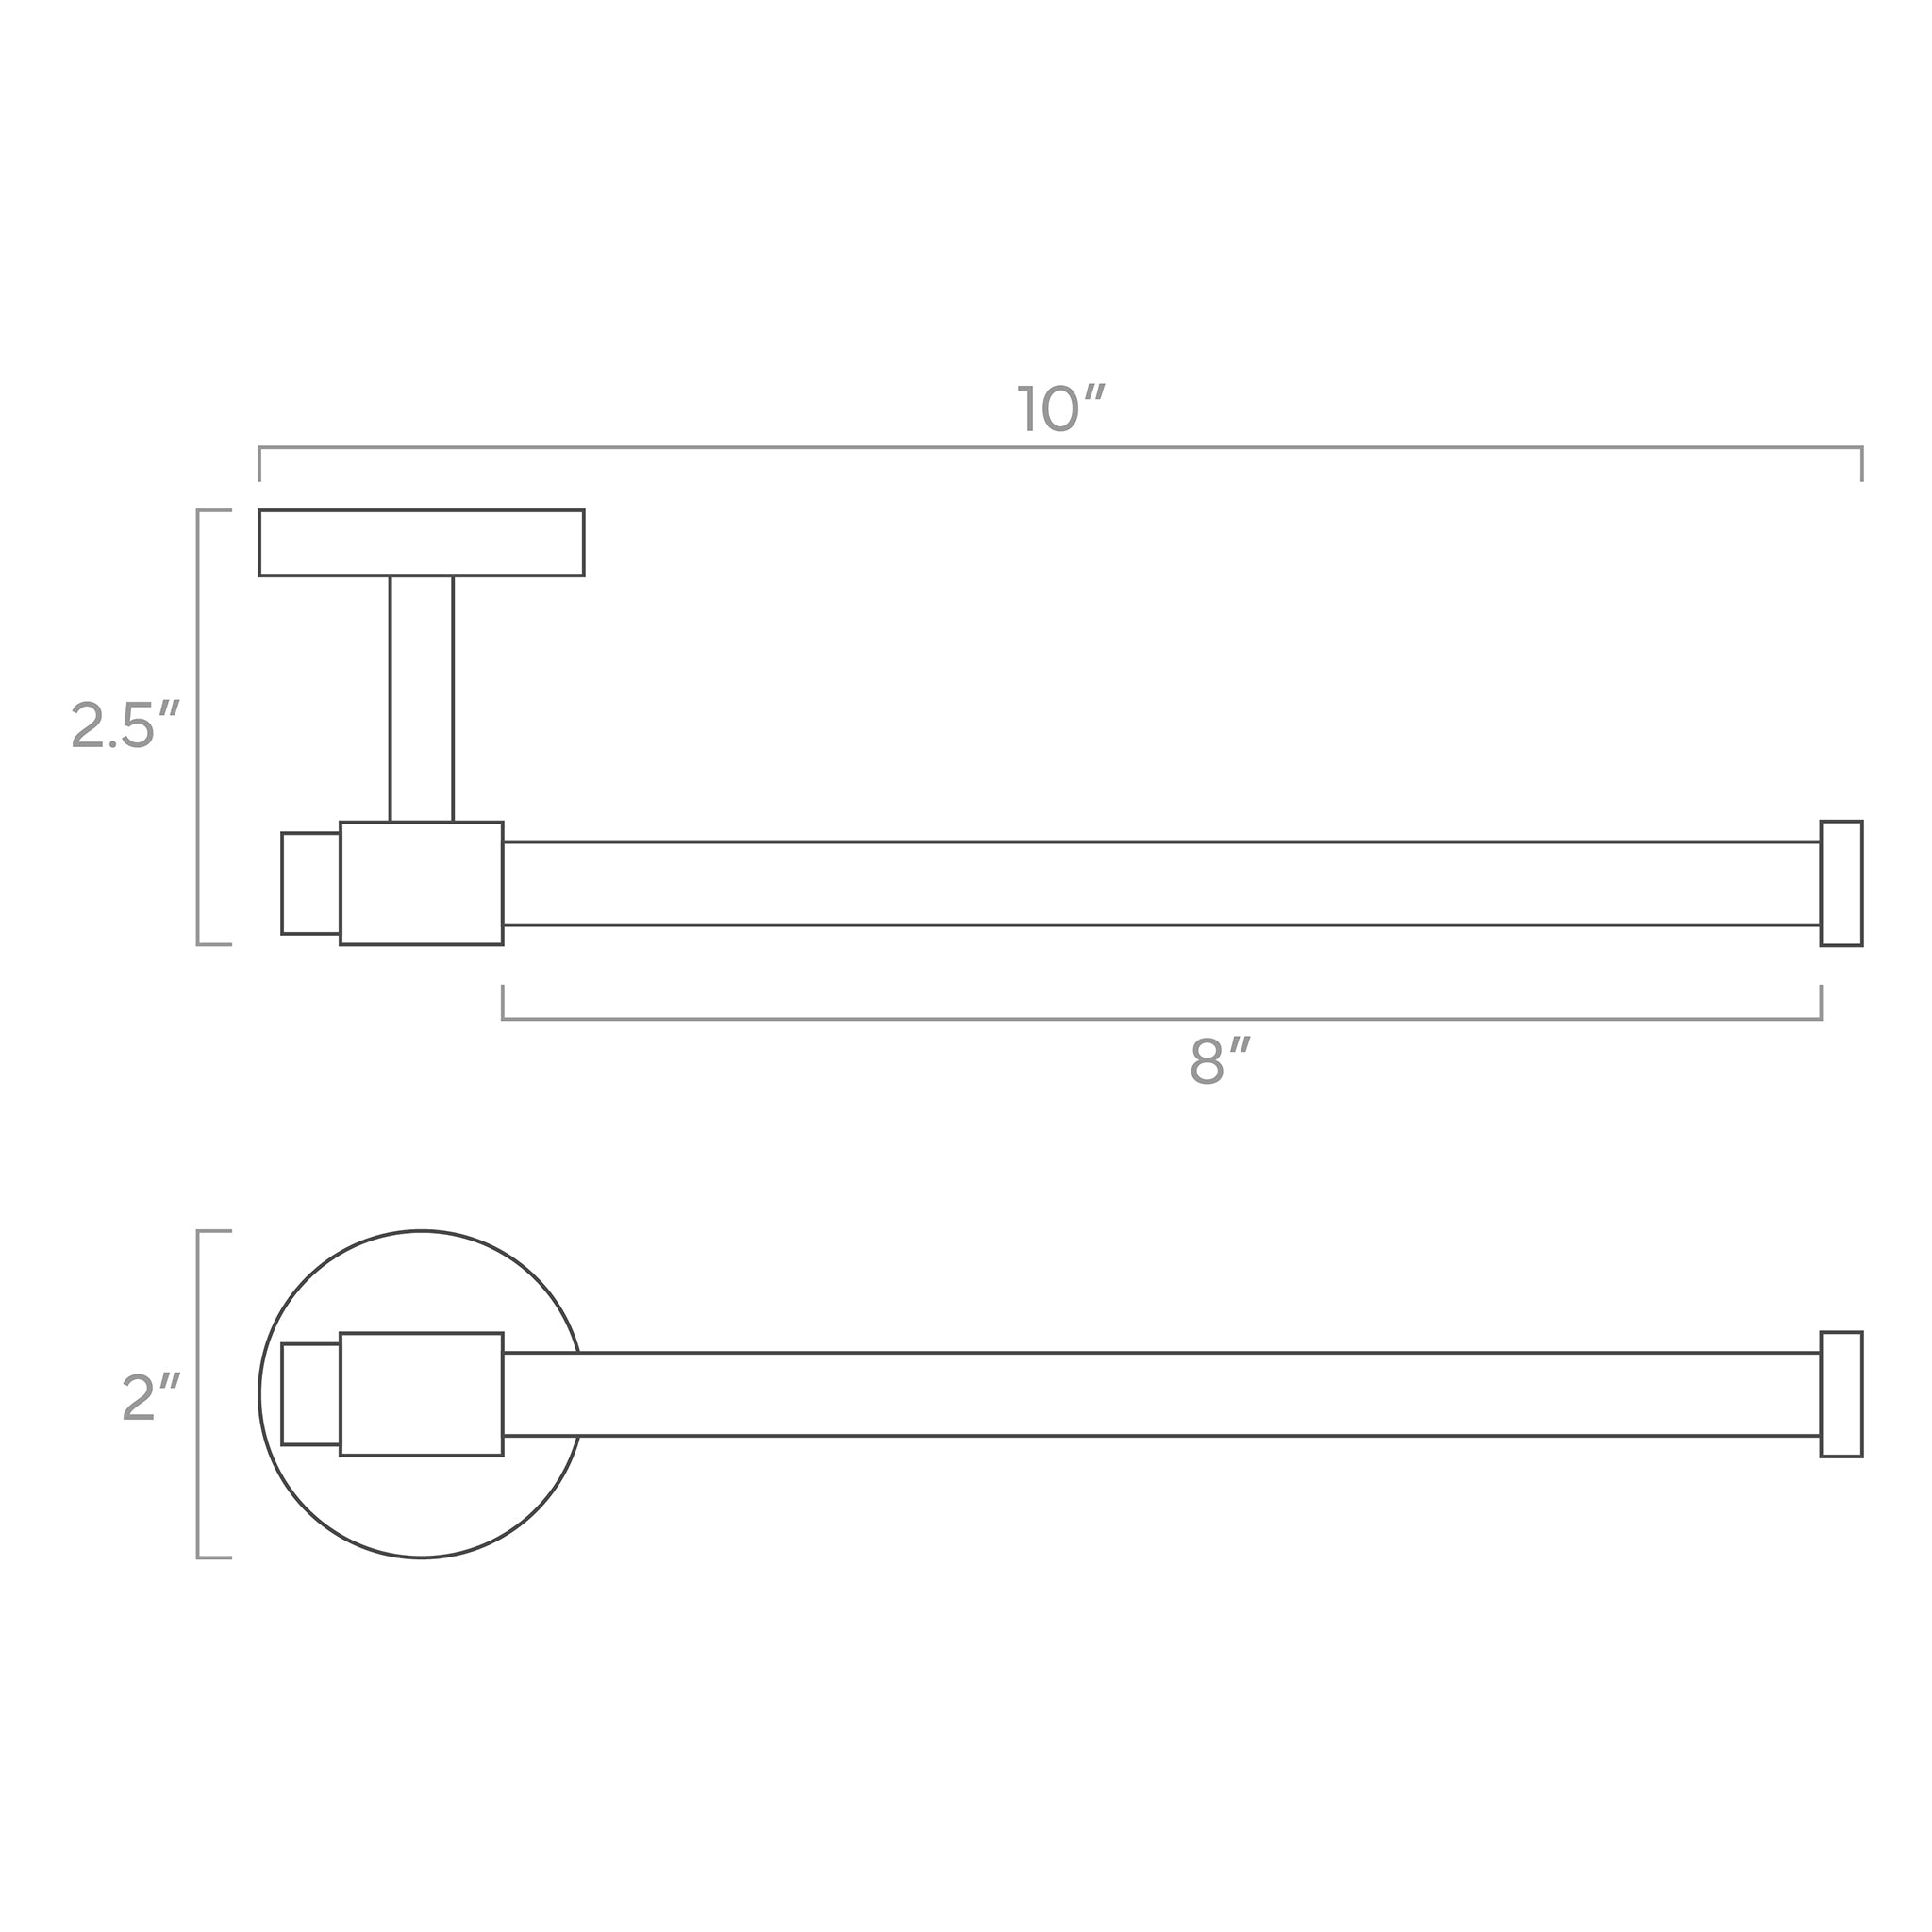 persona hand towel bar ISO drawing, dutton brown hardware